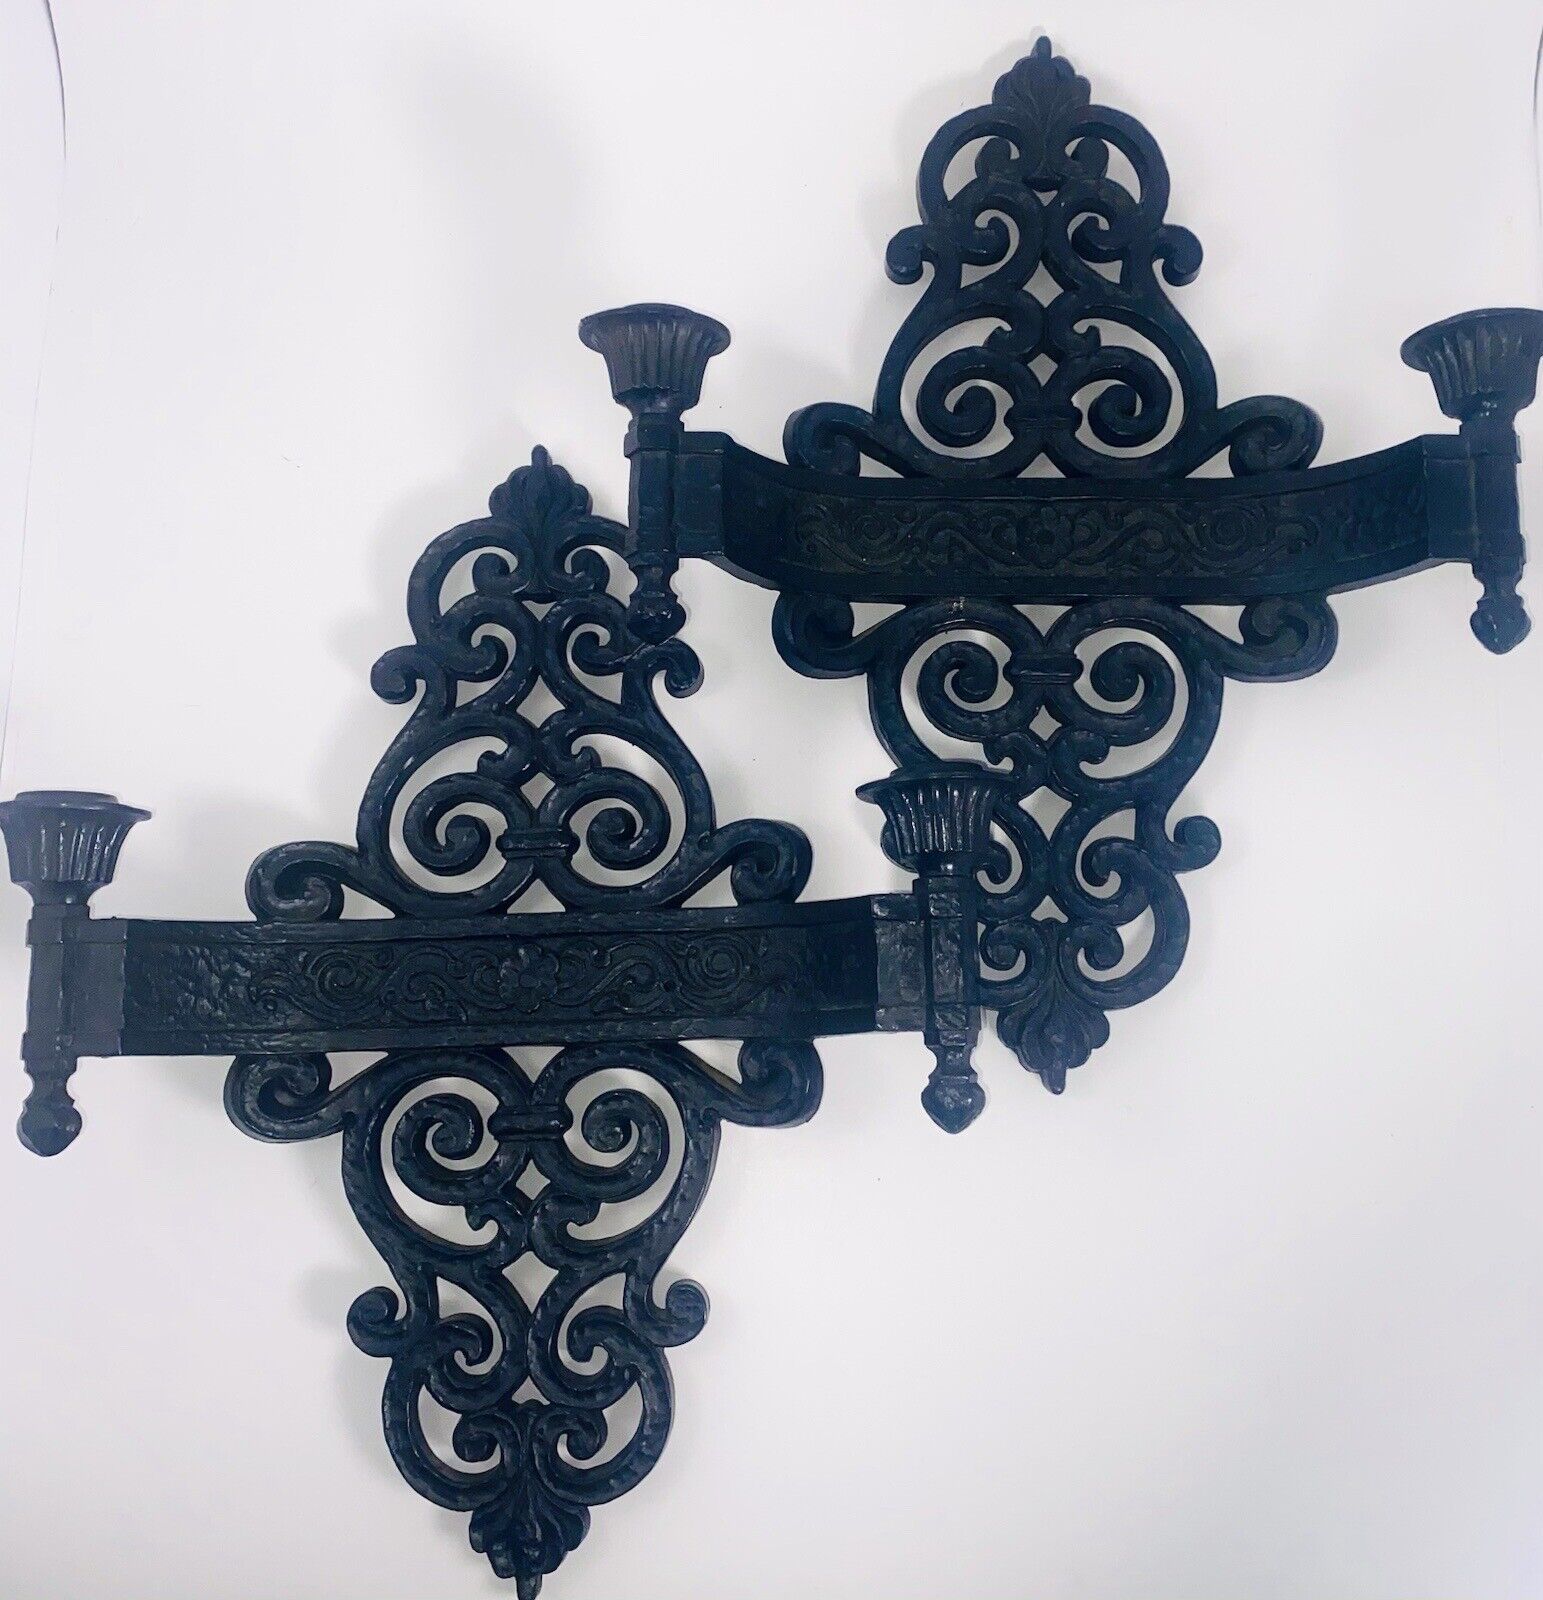 Syroco Vintage Wall Double Candle Sconce black MCMLXIX made USA 11” X 14”